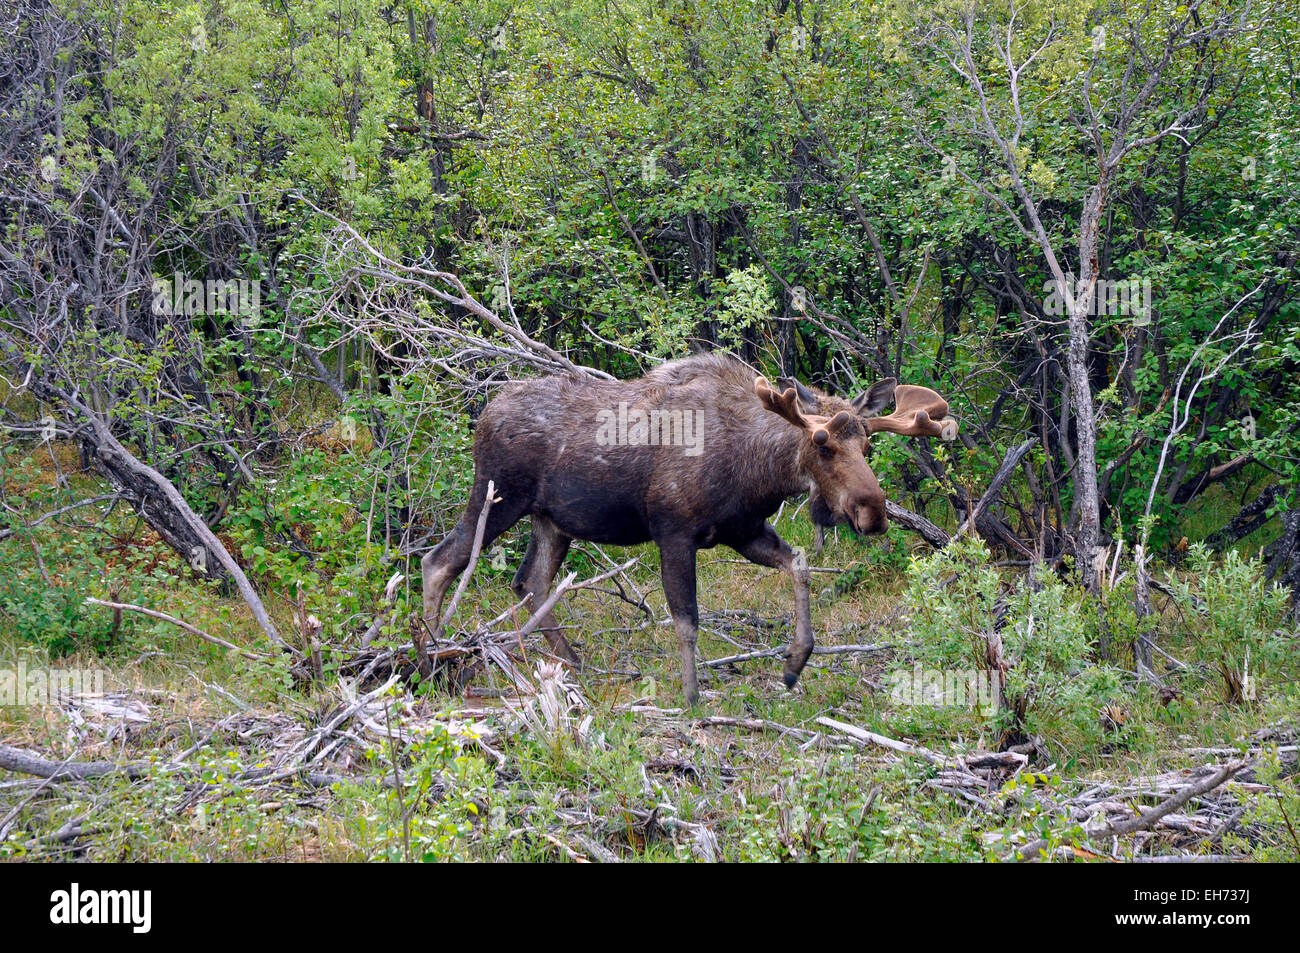 Moose in an Alaskan forest. Stock Photo